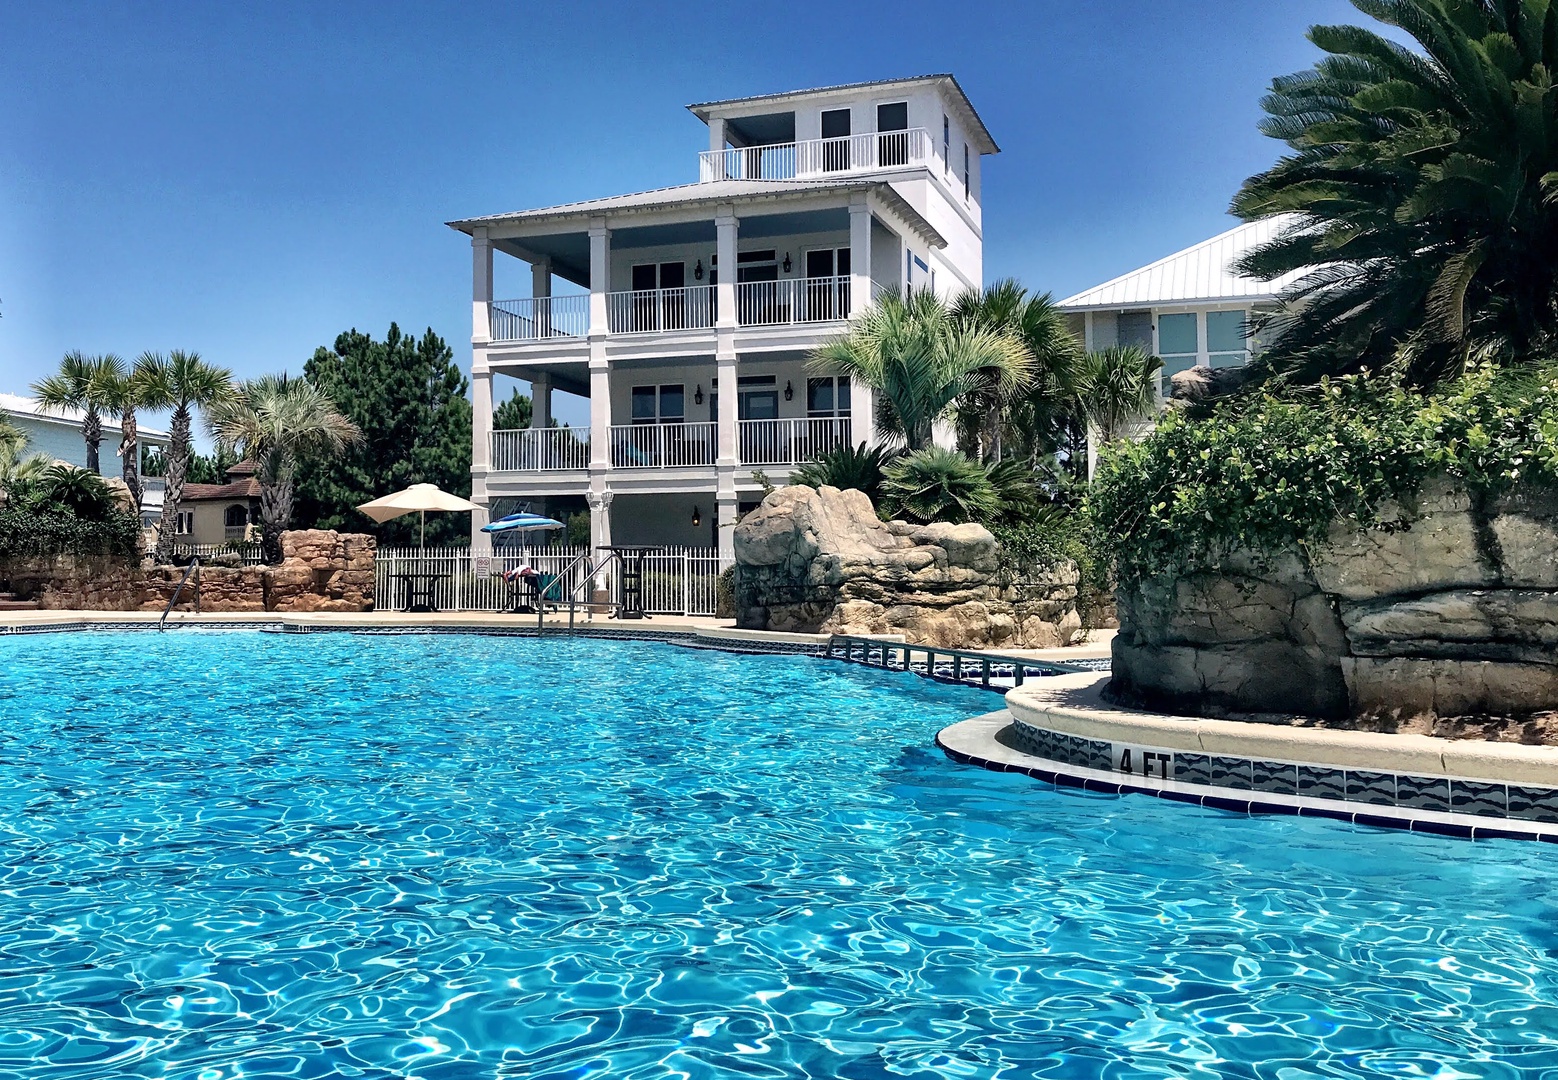 Perfectly situated on one of the largest pools in the area!